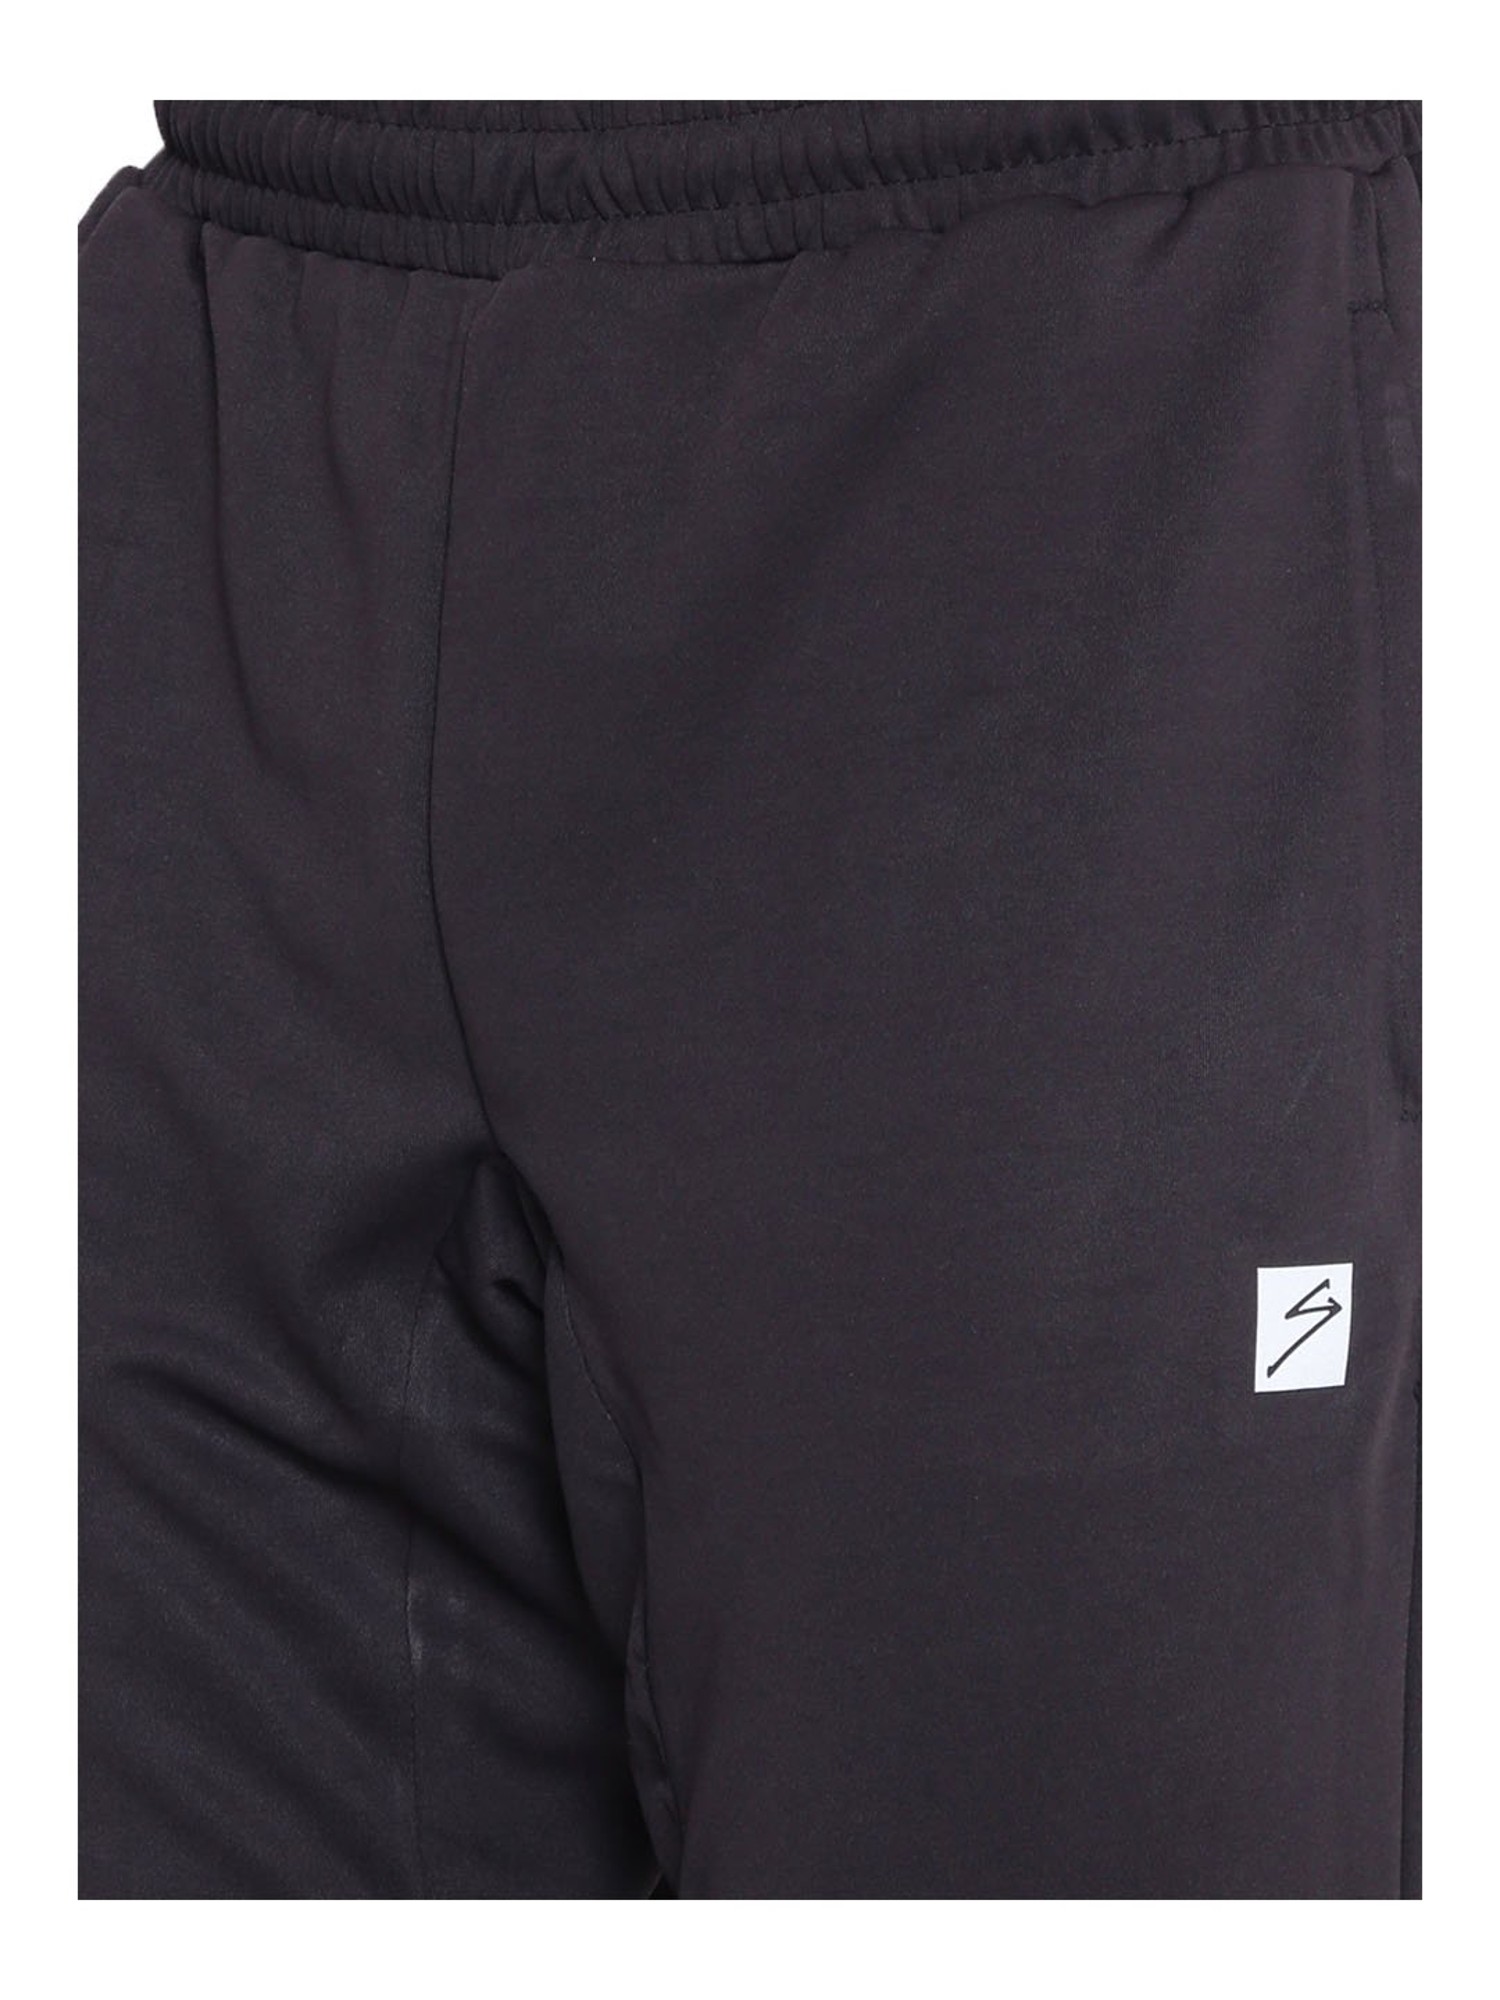 DOMYOS by Decathlon Solid Women Black Track Pants  Buy BLACK DOMYOS by  Decathlon Solid Women Black Track Pants Online at Best Prices in India   Flipkartcom